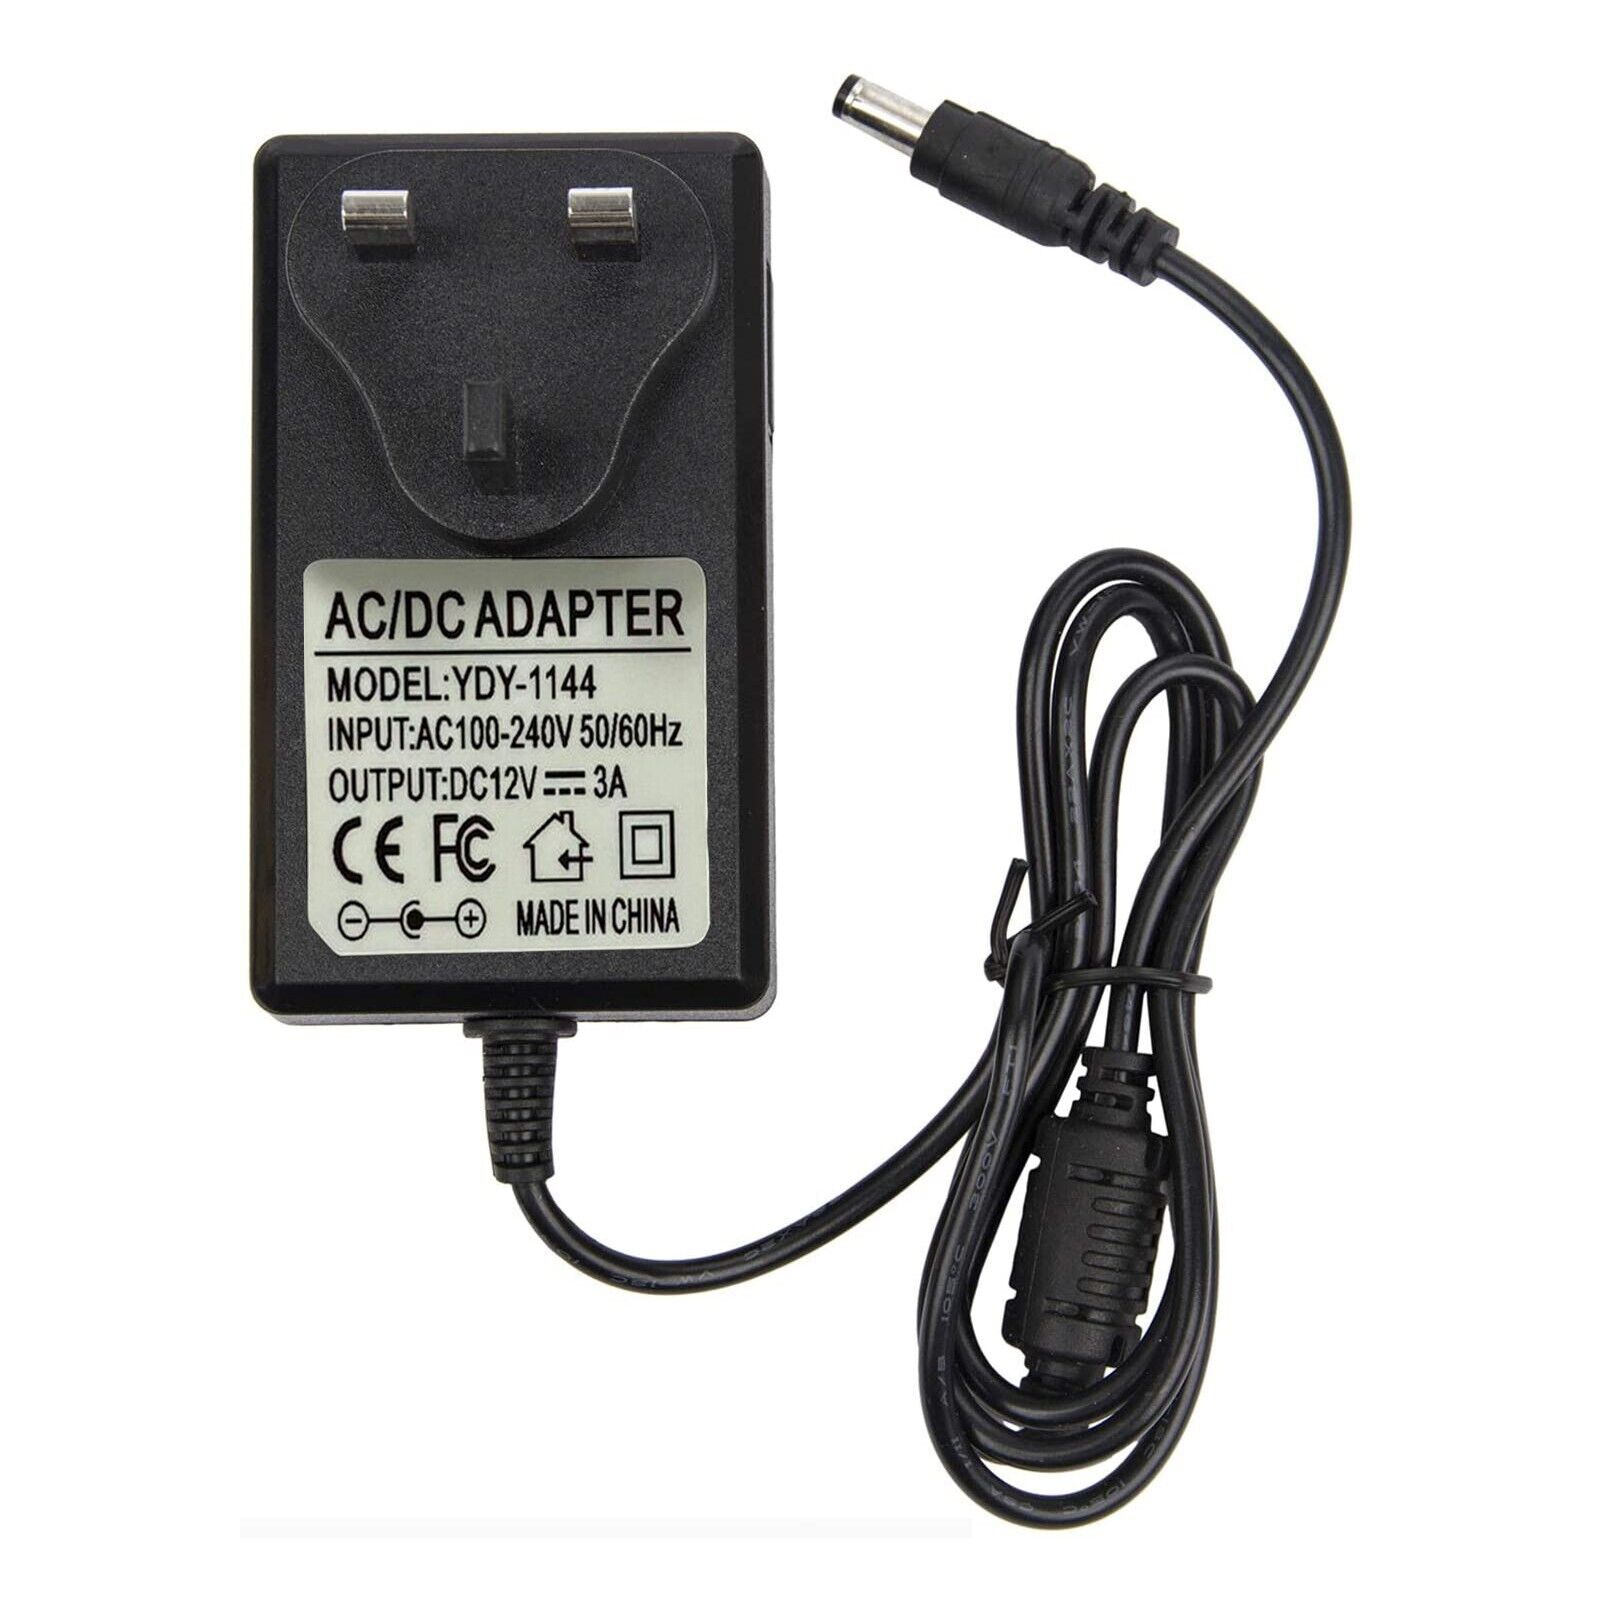 *Brand NEW* 220V 12V 3A AC/DC Adapter For YDY-1144 LED Strip CCTV Camera Power Supply Charger - Click Image to Close